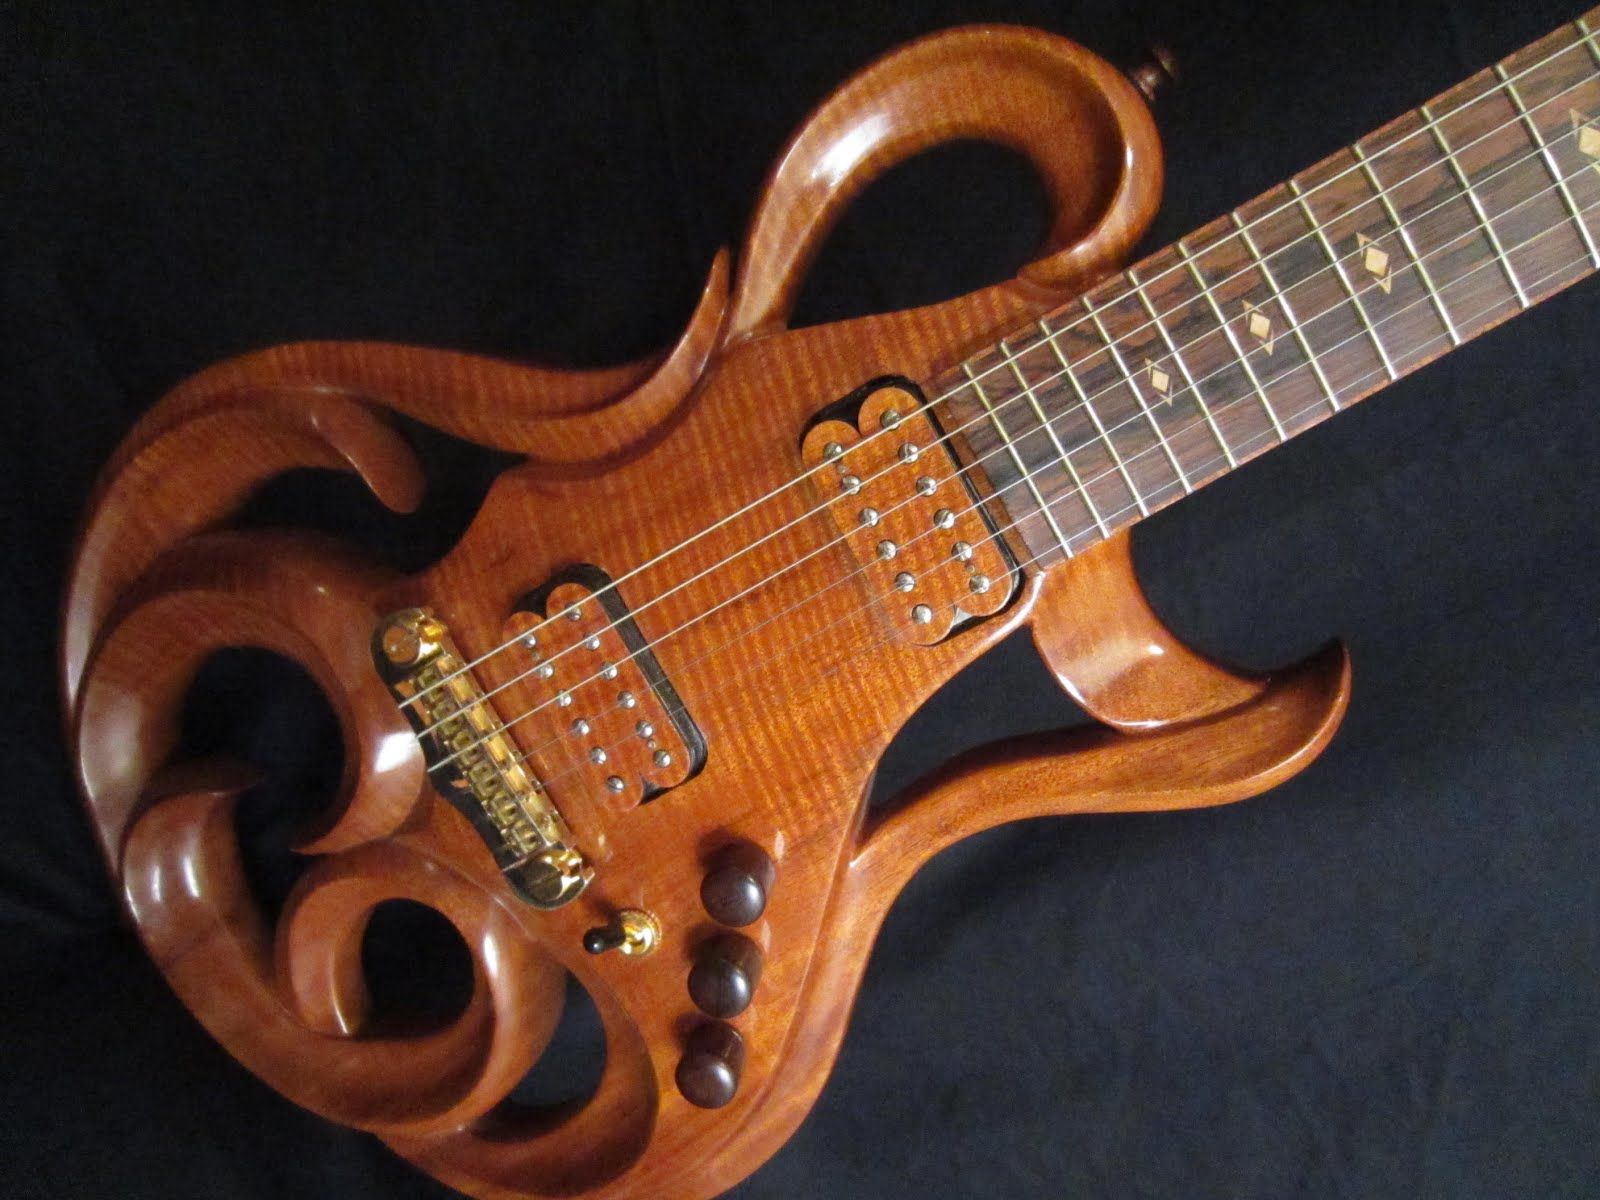 hand carved guitar | ... of the Beautiful Phoenix Hand Carved ...